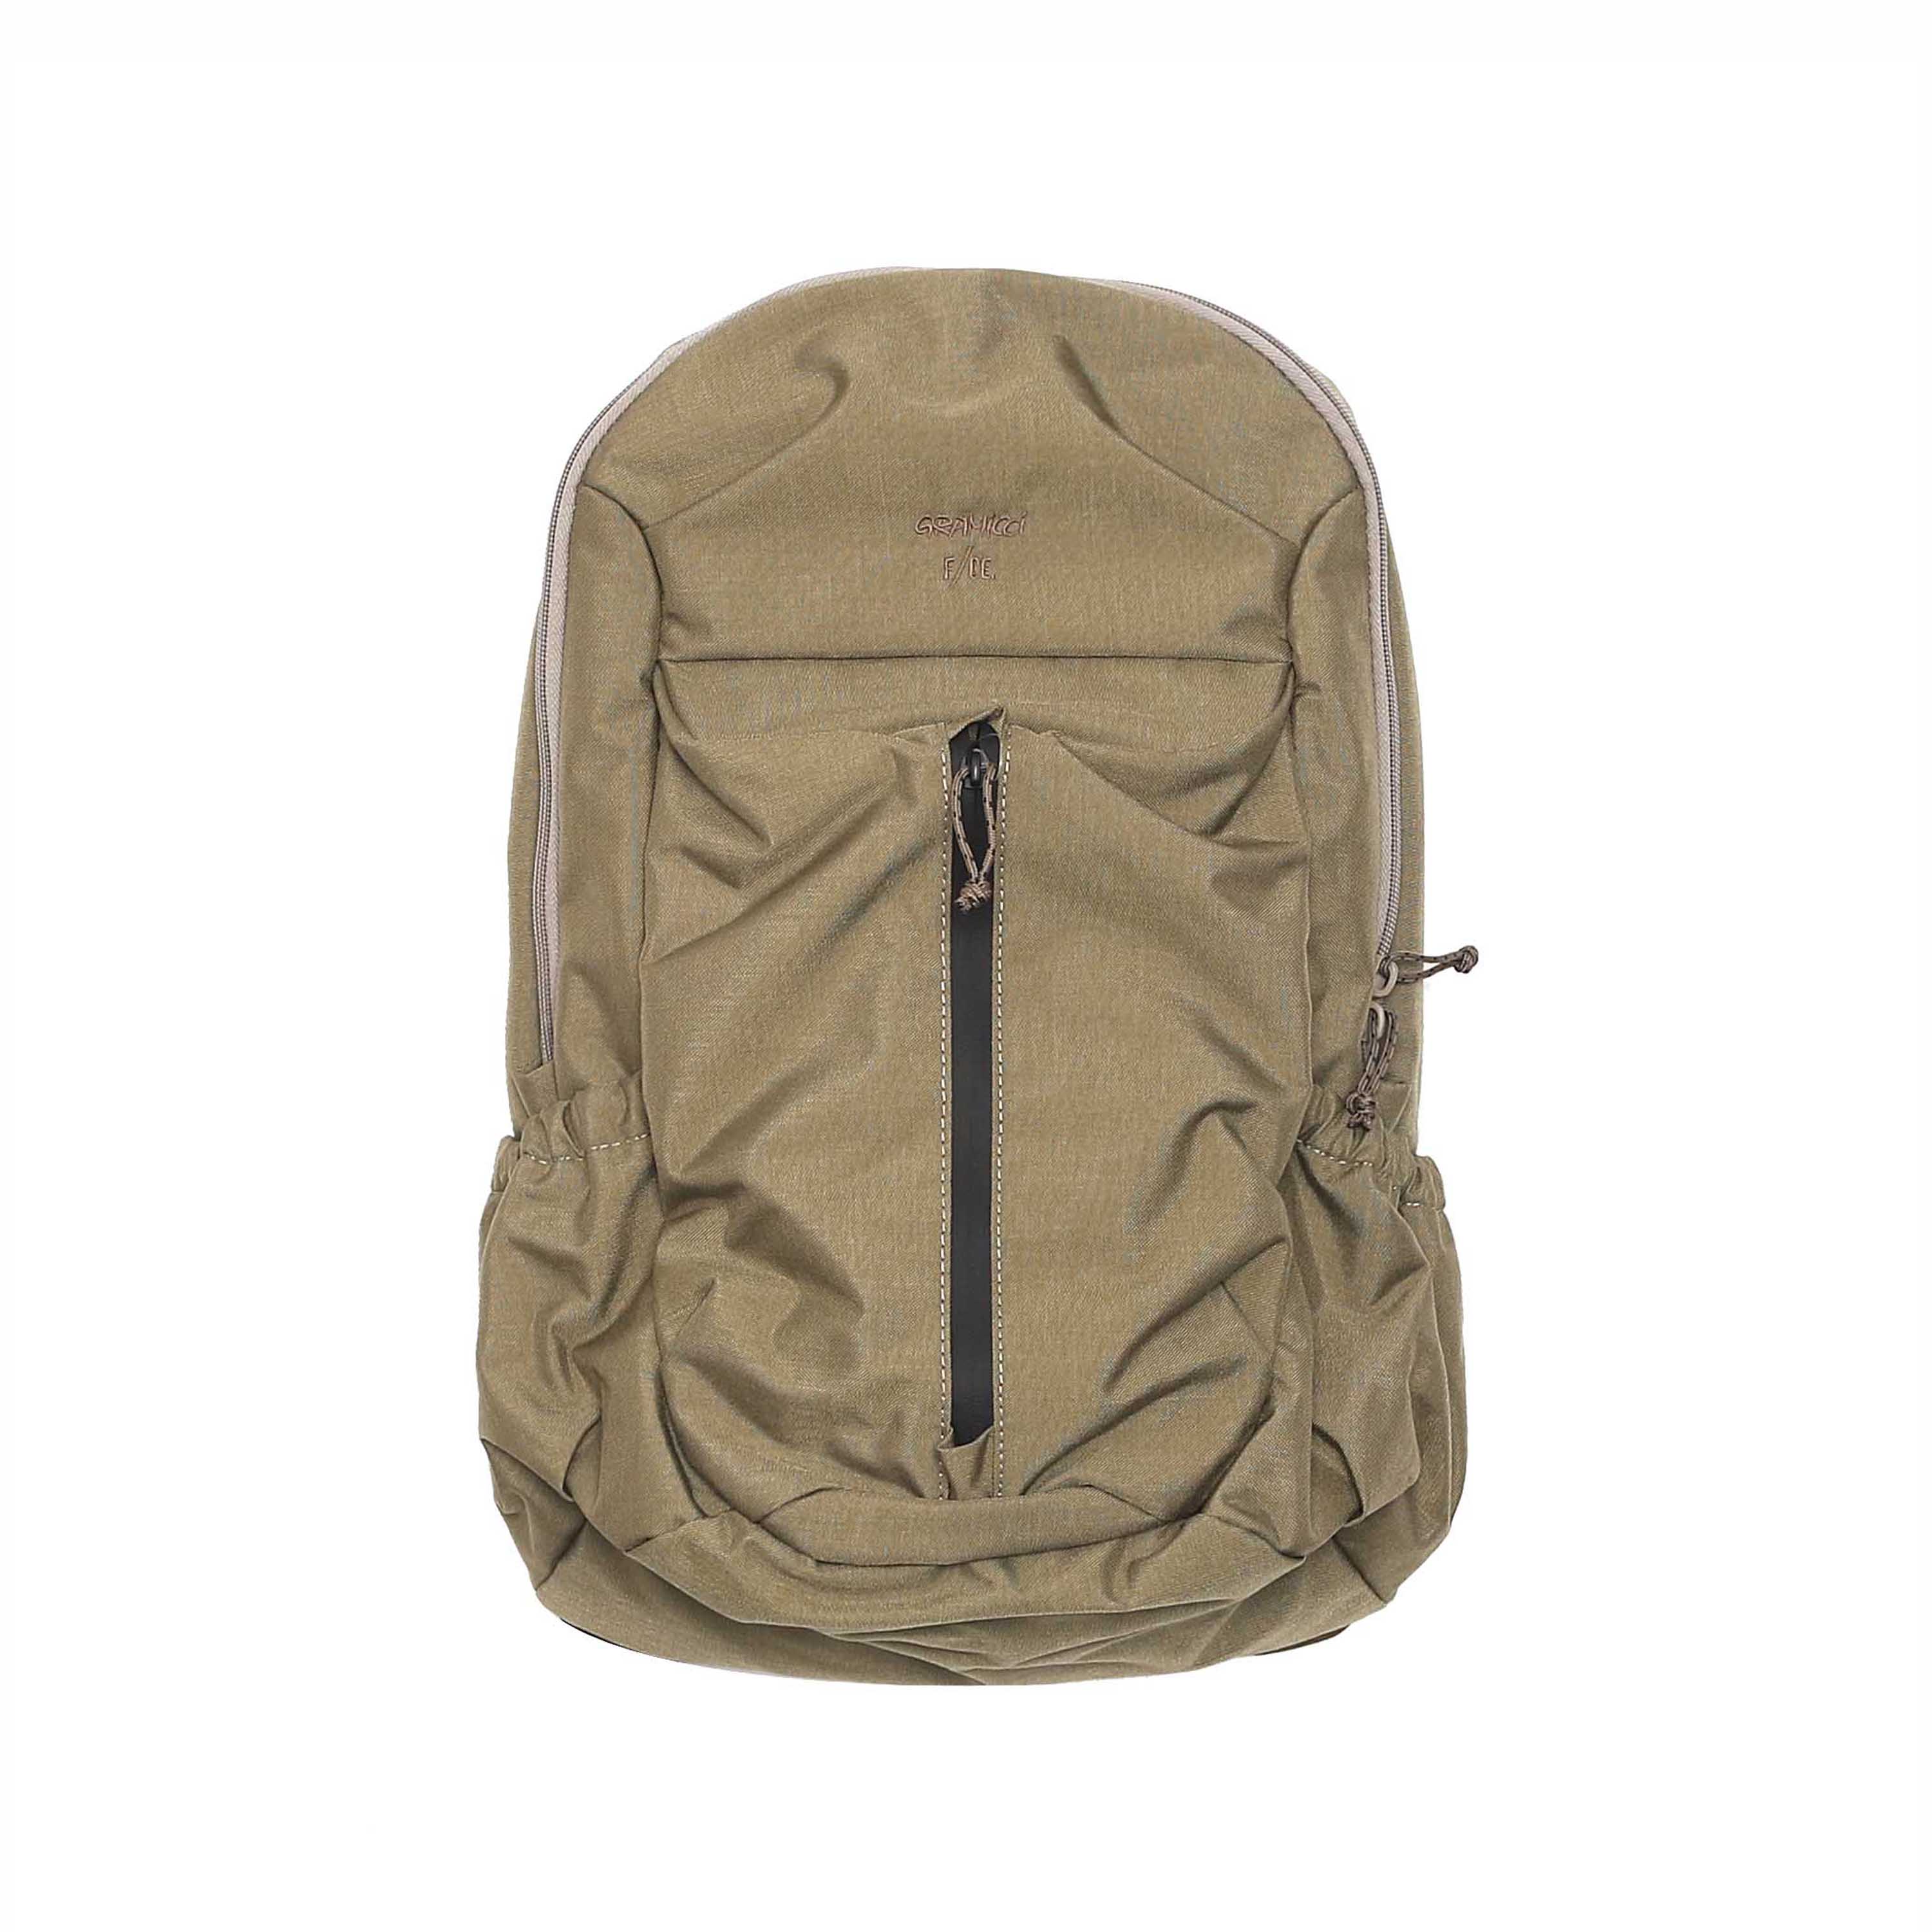 BY F/CE TECHNICAL TRAVEL PACK - COYOTE